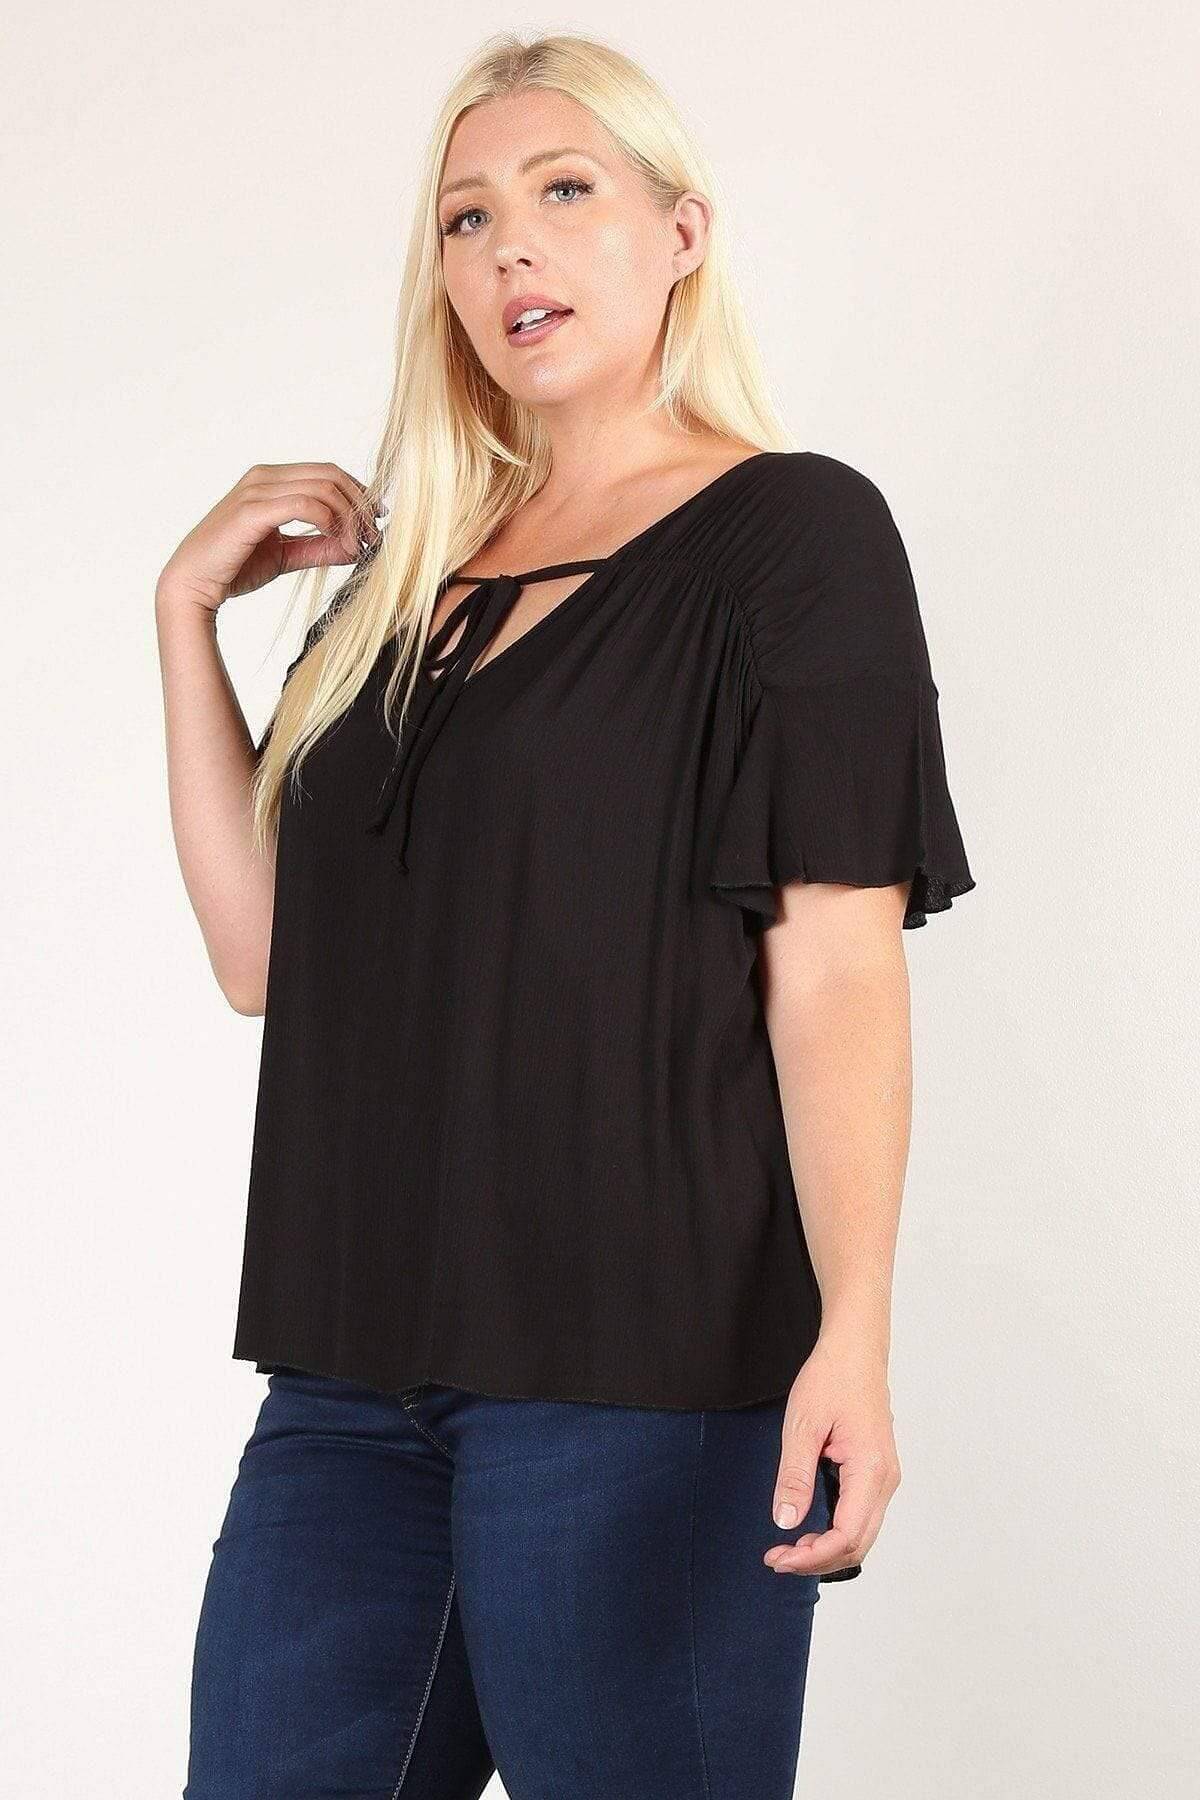 Black 3/4 Ruched Sleeve Plus Top - Shopping Therapy, LLC Top